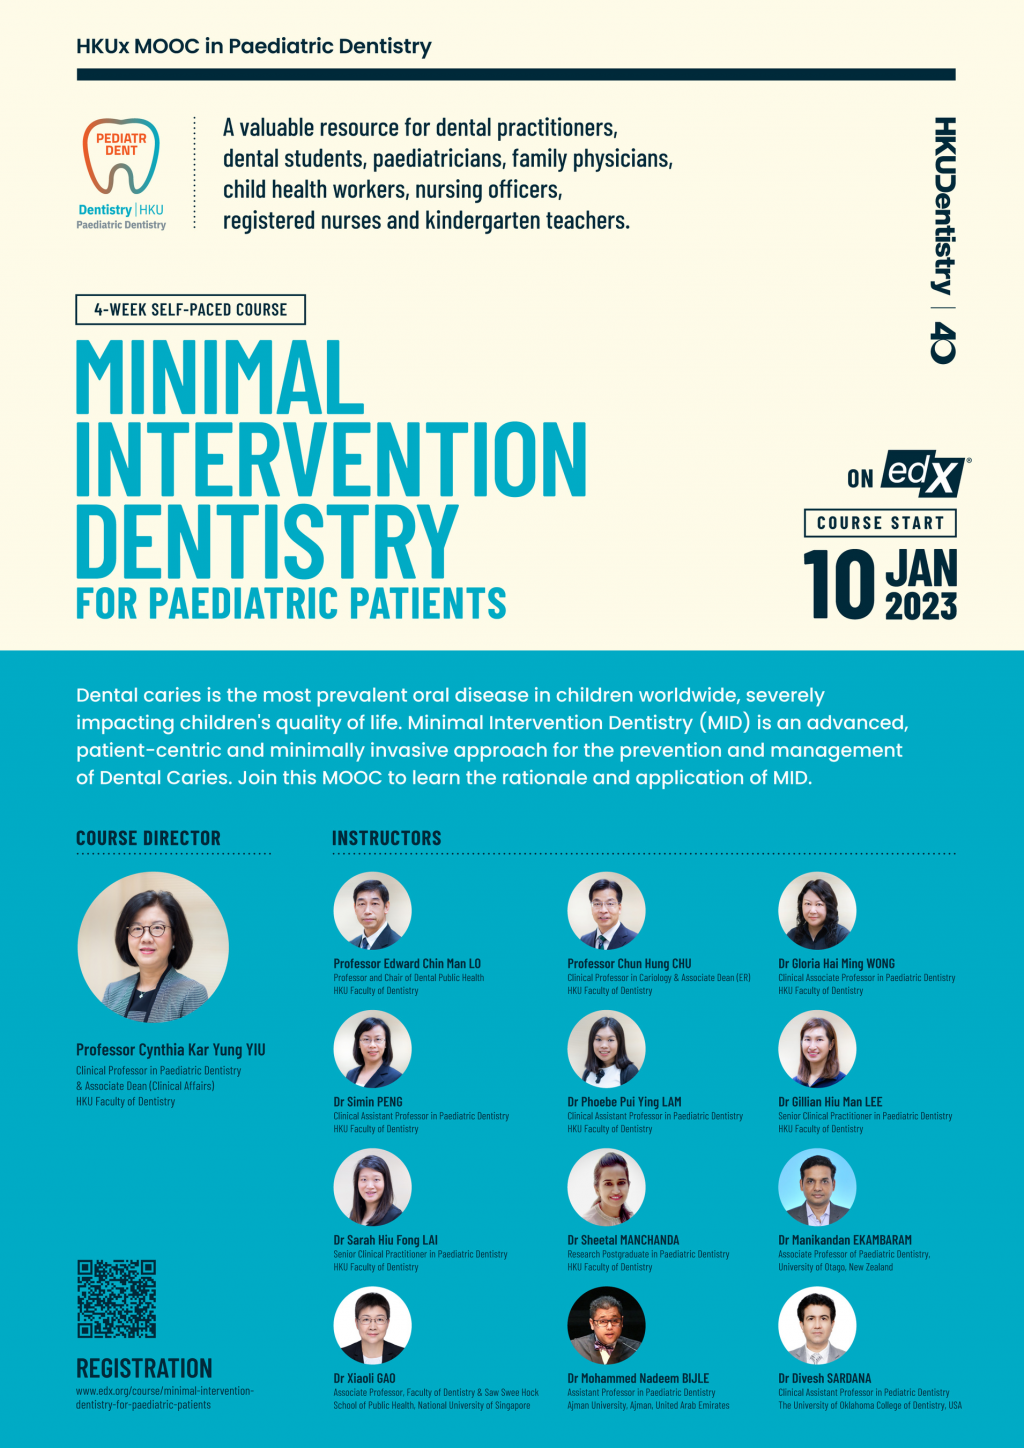 Minimal Intervention Dentistry (MID) for Paediatric Patients MOOC starts 10 Jan on edX